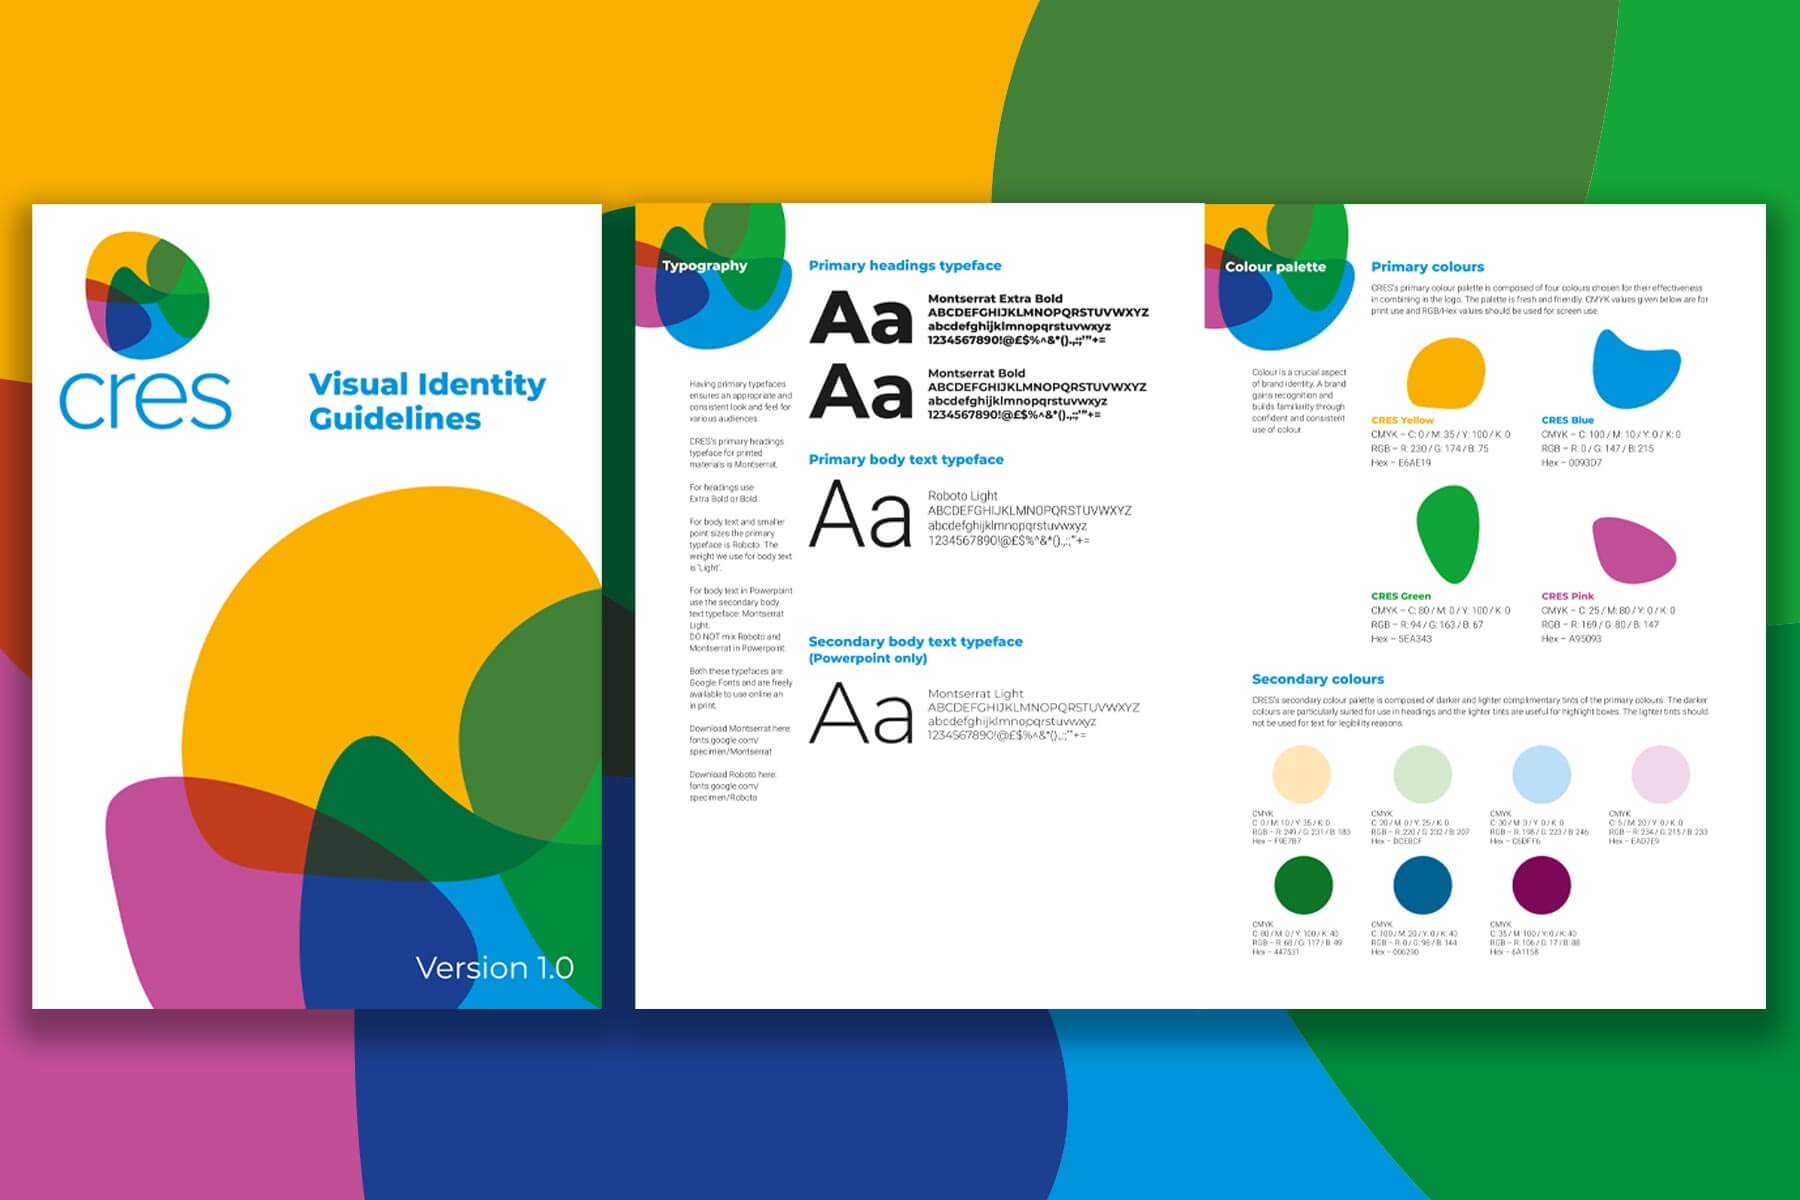 Sample pages from CRES Brand Guidelines